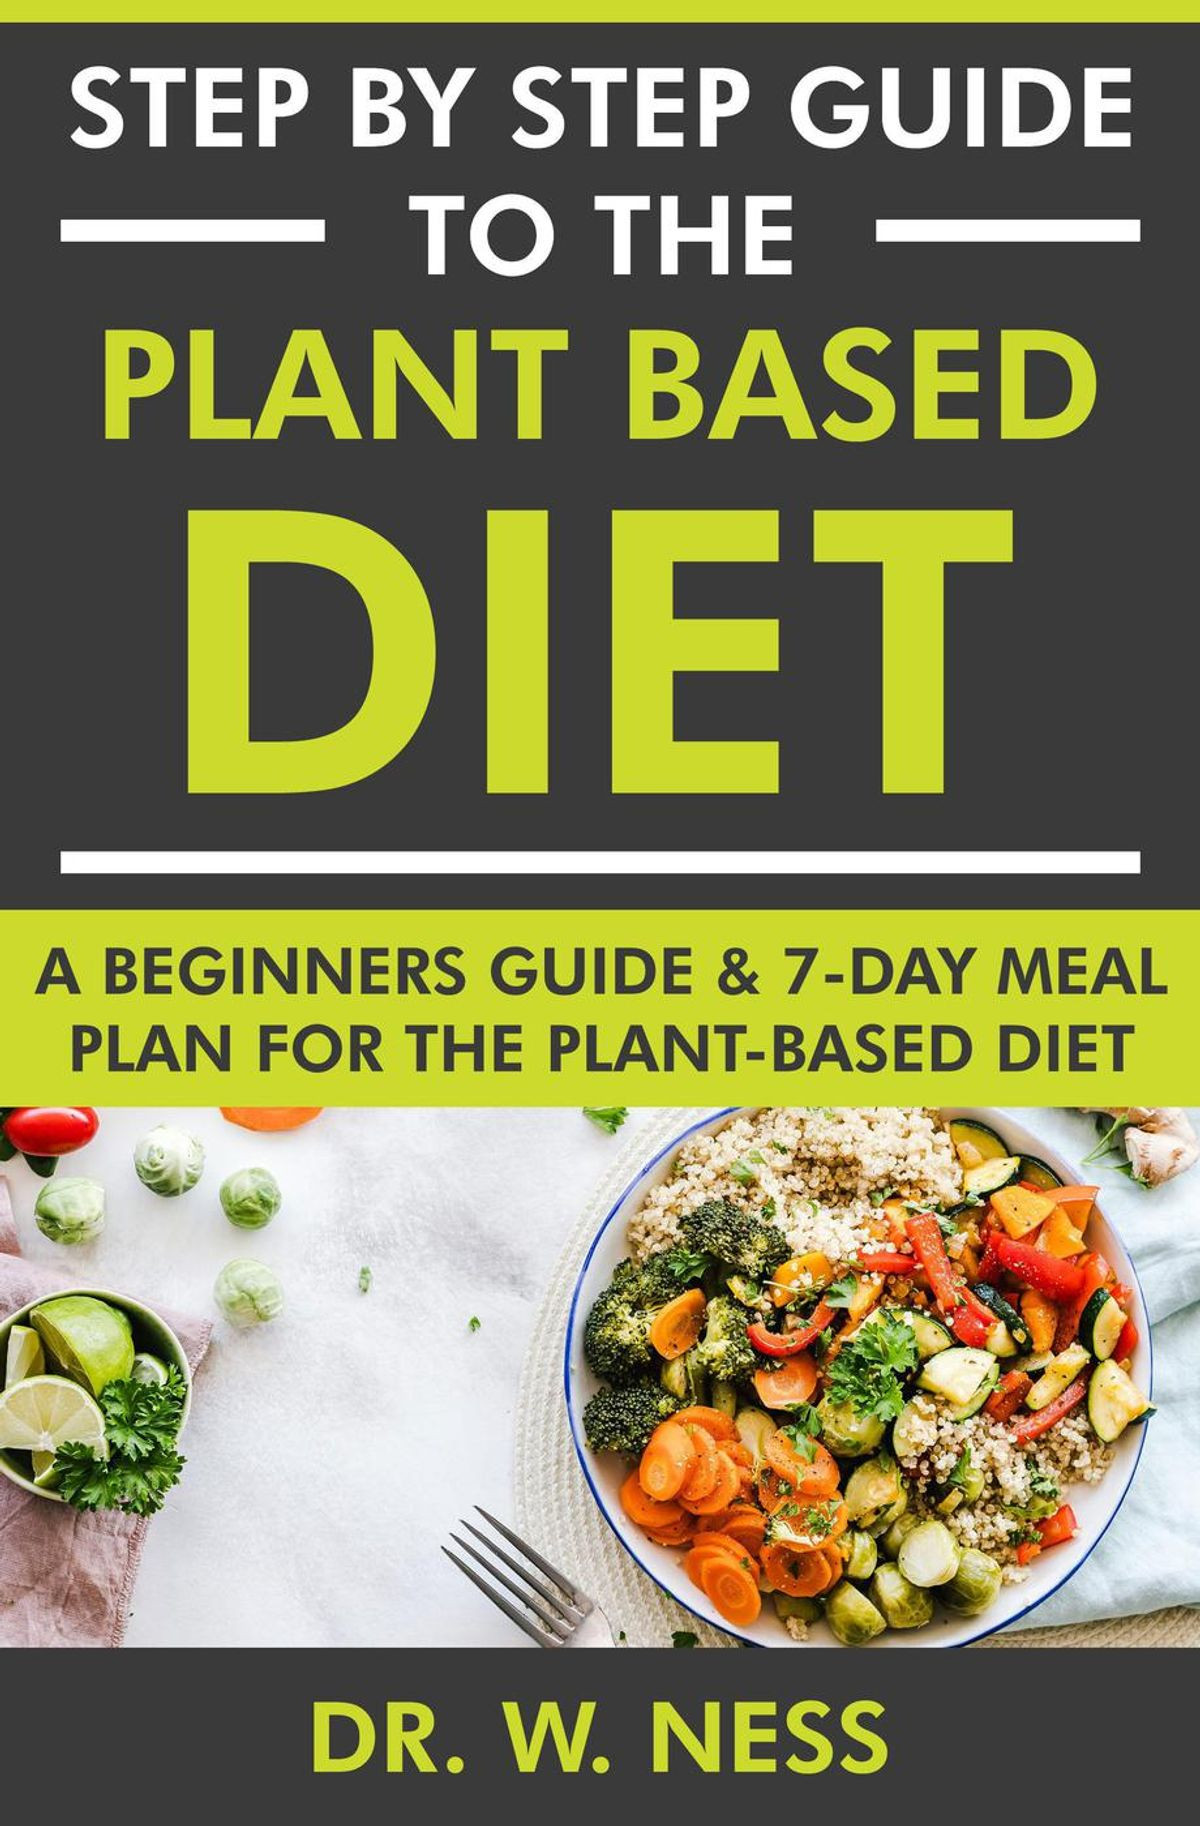 Plant Based Diet Meal Plan For Beginners
 Step by Step Guide to the Plant Based Diet A Beginners